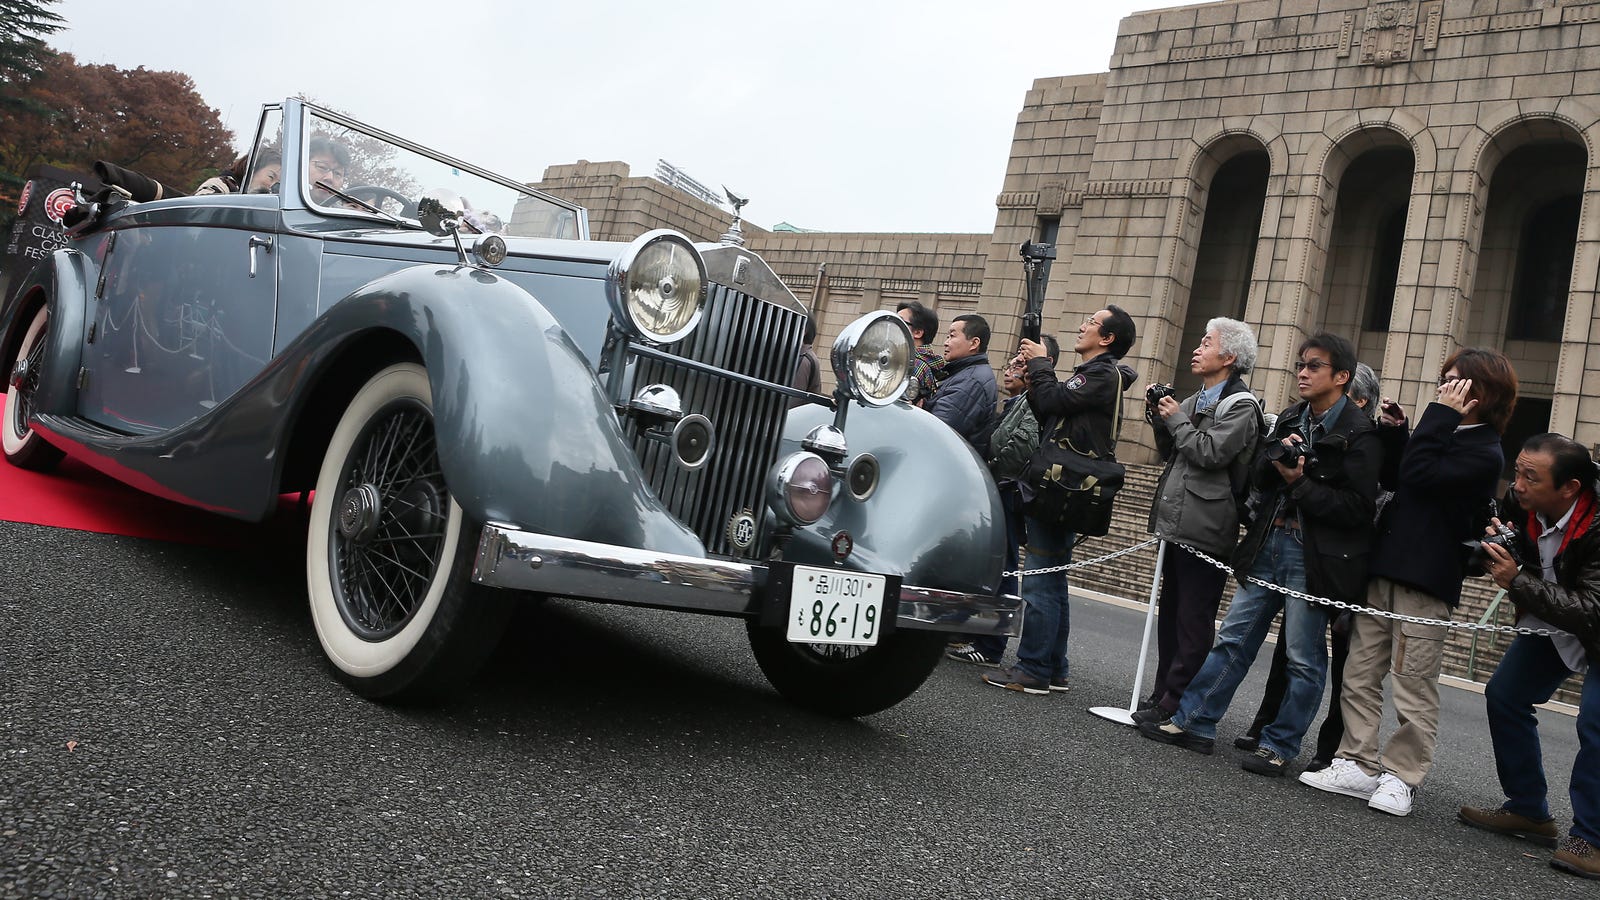 Scenes From The 2014 Tokyo Classic Car Festival